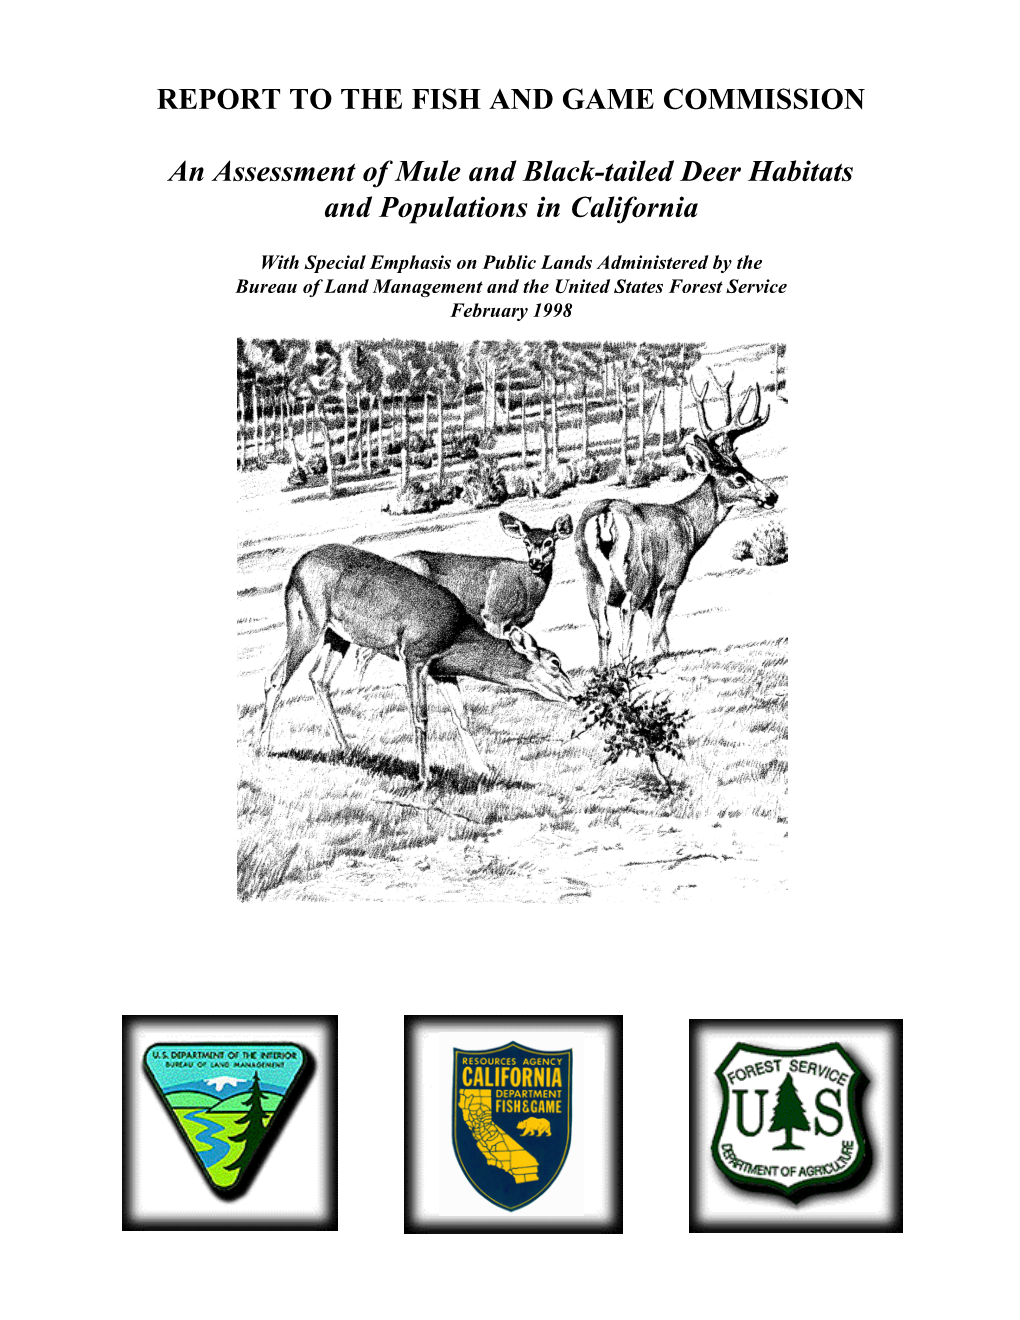 An Assessment of Mule and Black-Tailed Deer Habitats and Populations in California